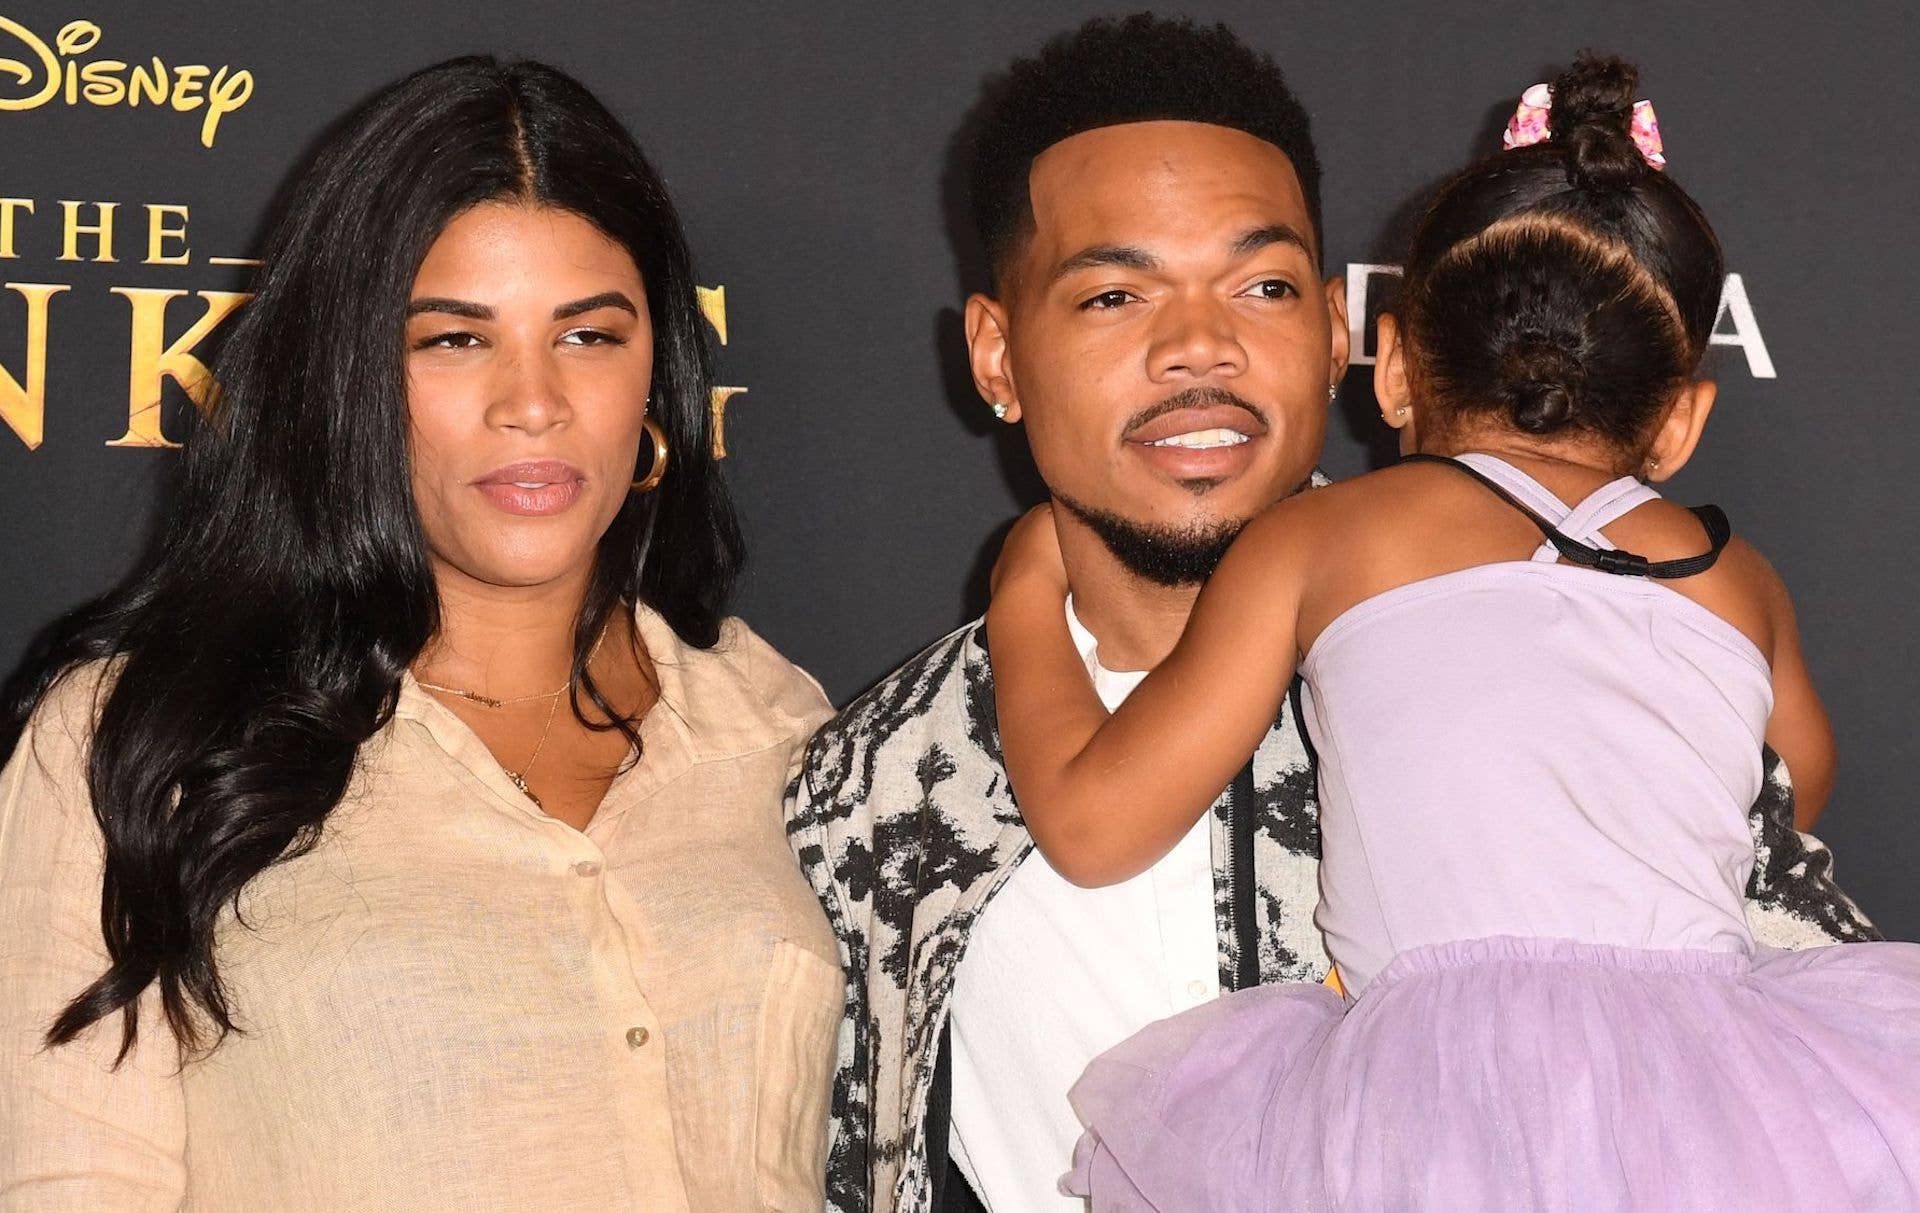 Chance the Rapper and his wife Kirsten Corley-Bennett